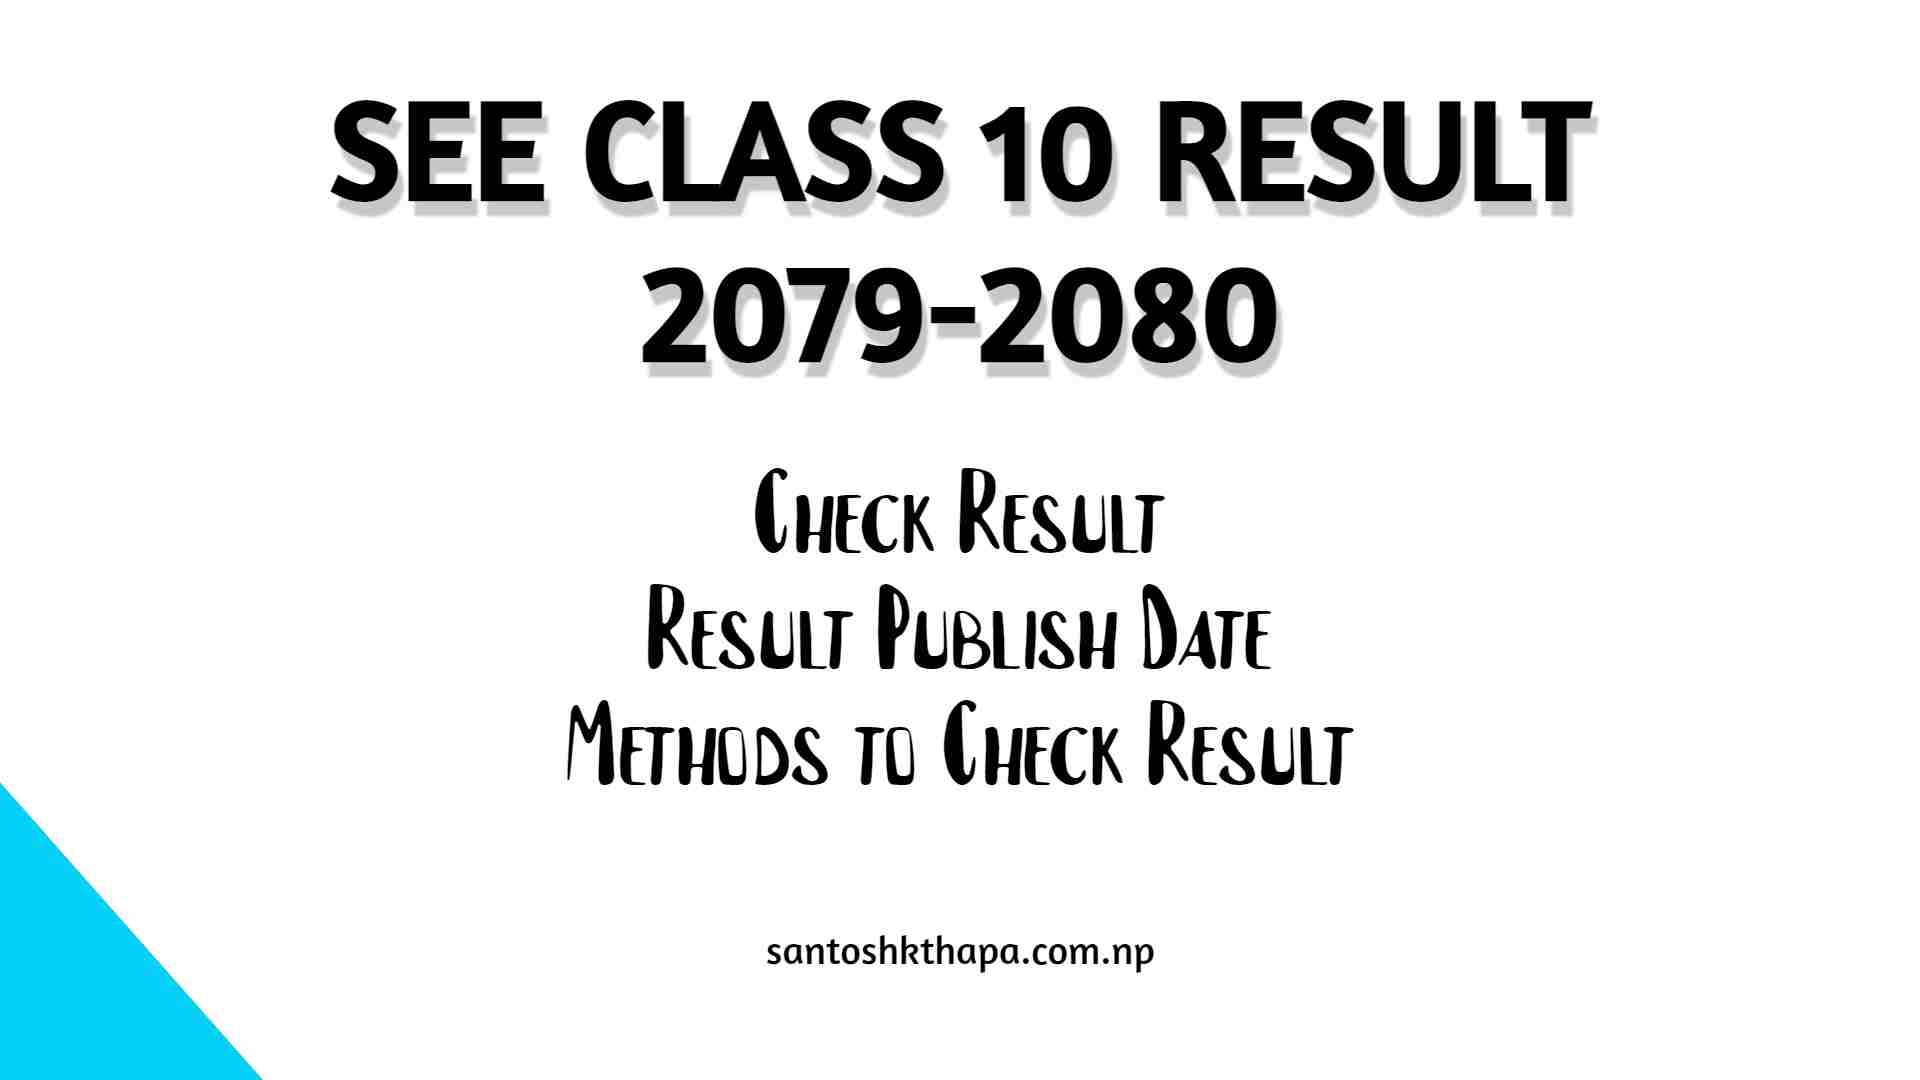 check-see-class-10-result-2079